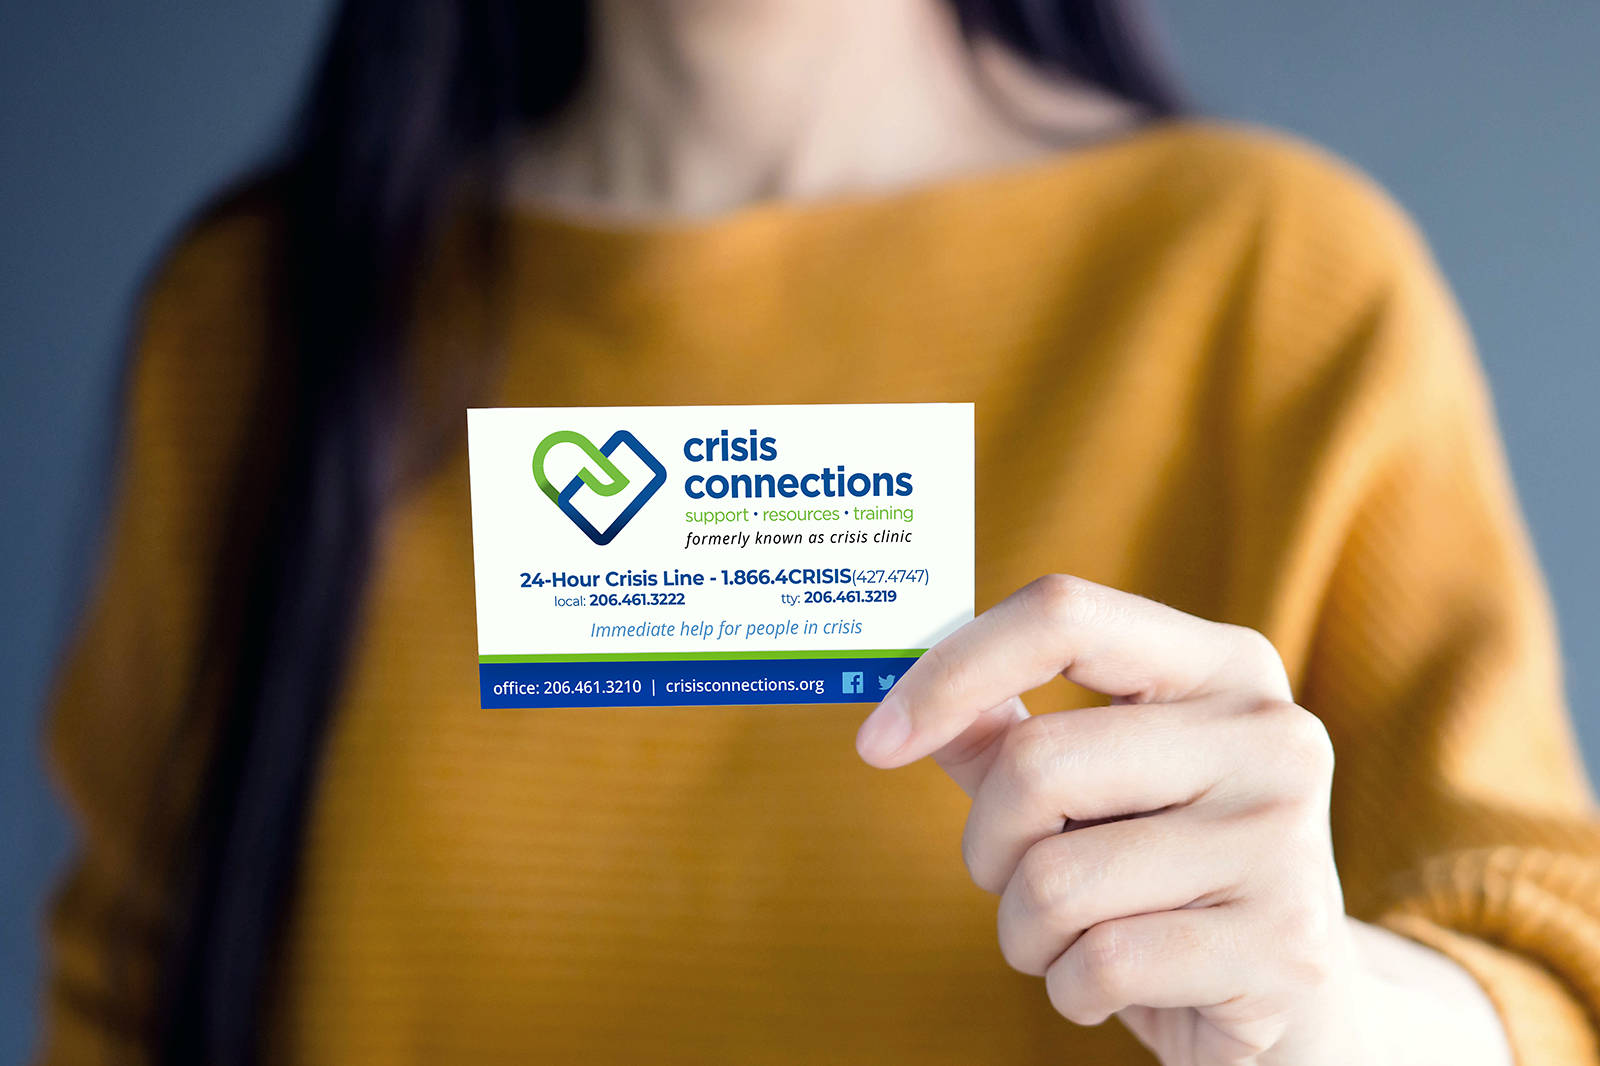 September is Suicide Prevention Month, and Crisis Connections is joining with community partners to help others learn about resources that can help during times of crisis.